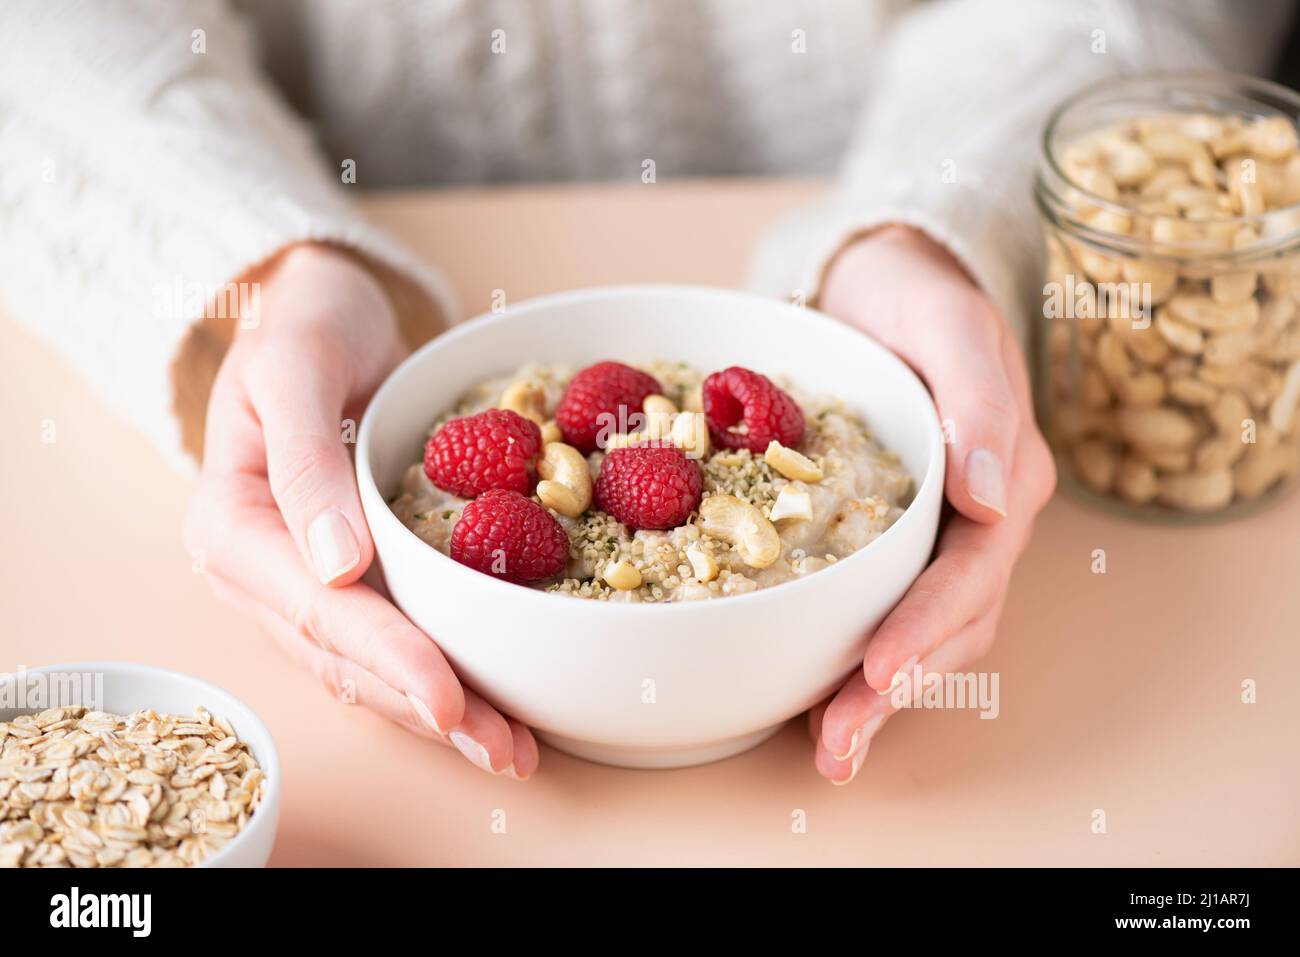 Oatmeal porridge with berries and seeds in caucasian female hands. Concept of eating healthy, vegan lifestyle, dieting Stock Photo